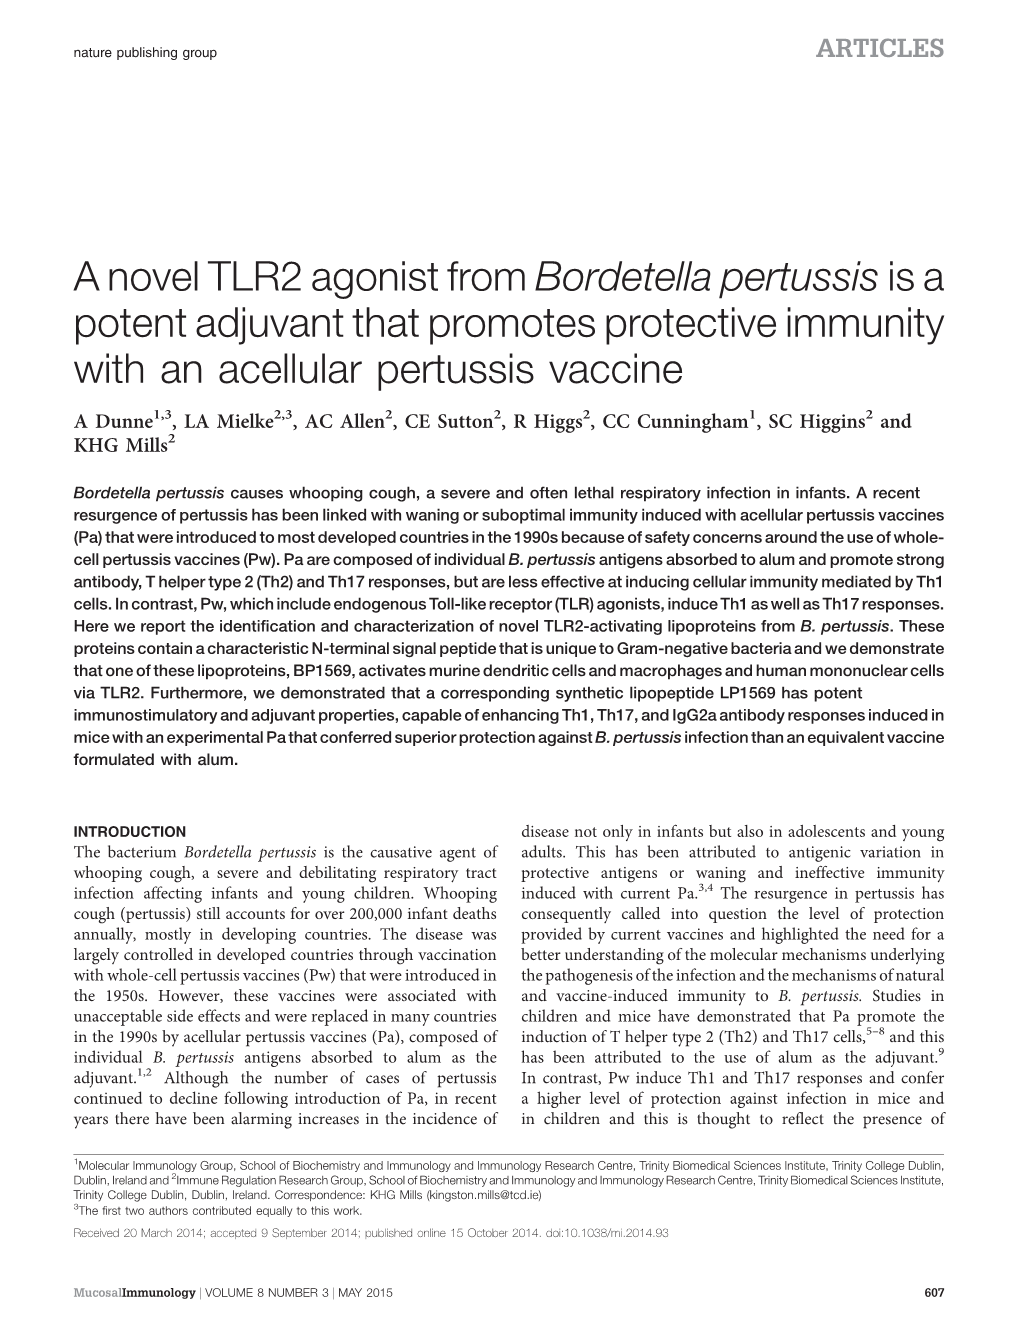 A Novel TLR2 Agonist from Bordetella Pertussis Is a Potent Adjuvant That Promotes Protective Immunity with an Acellular Pertussis Vaccine